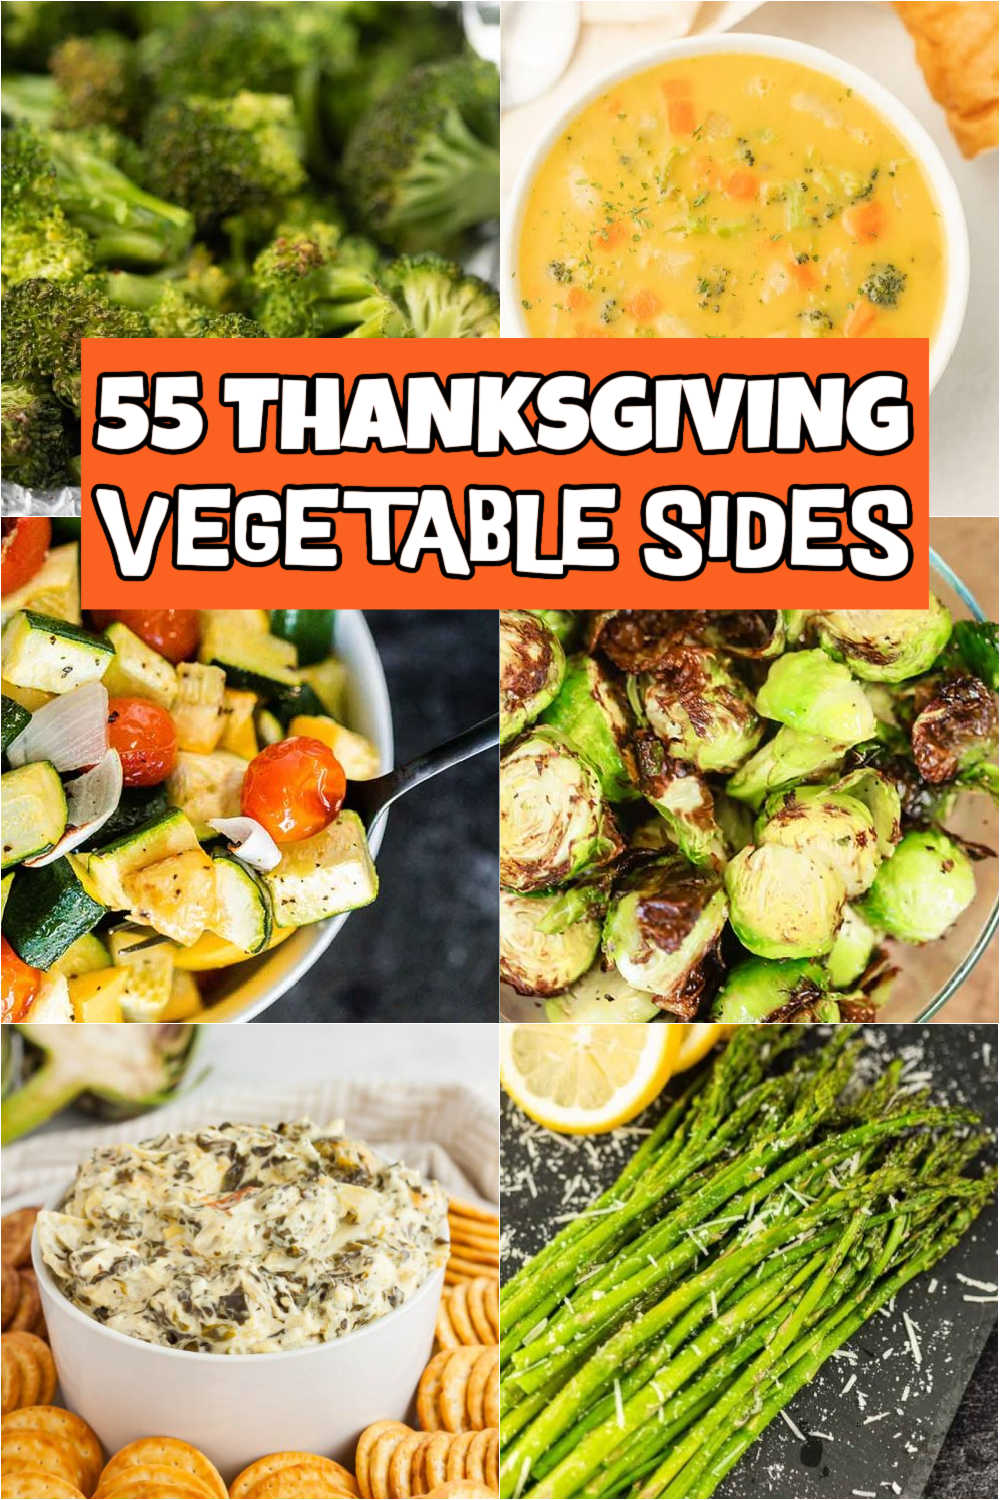 Every Thanksgiving should have delicious Thanksgiving vegetable sides. These 55 recipes are all so tasty and healthy. If you are looking for delicious side dishes other than stuffing, make one of these vegetable recipes. #eatingonadime #thanksgivingvegetablesides #vegetablesides